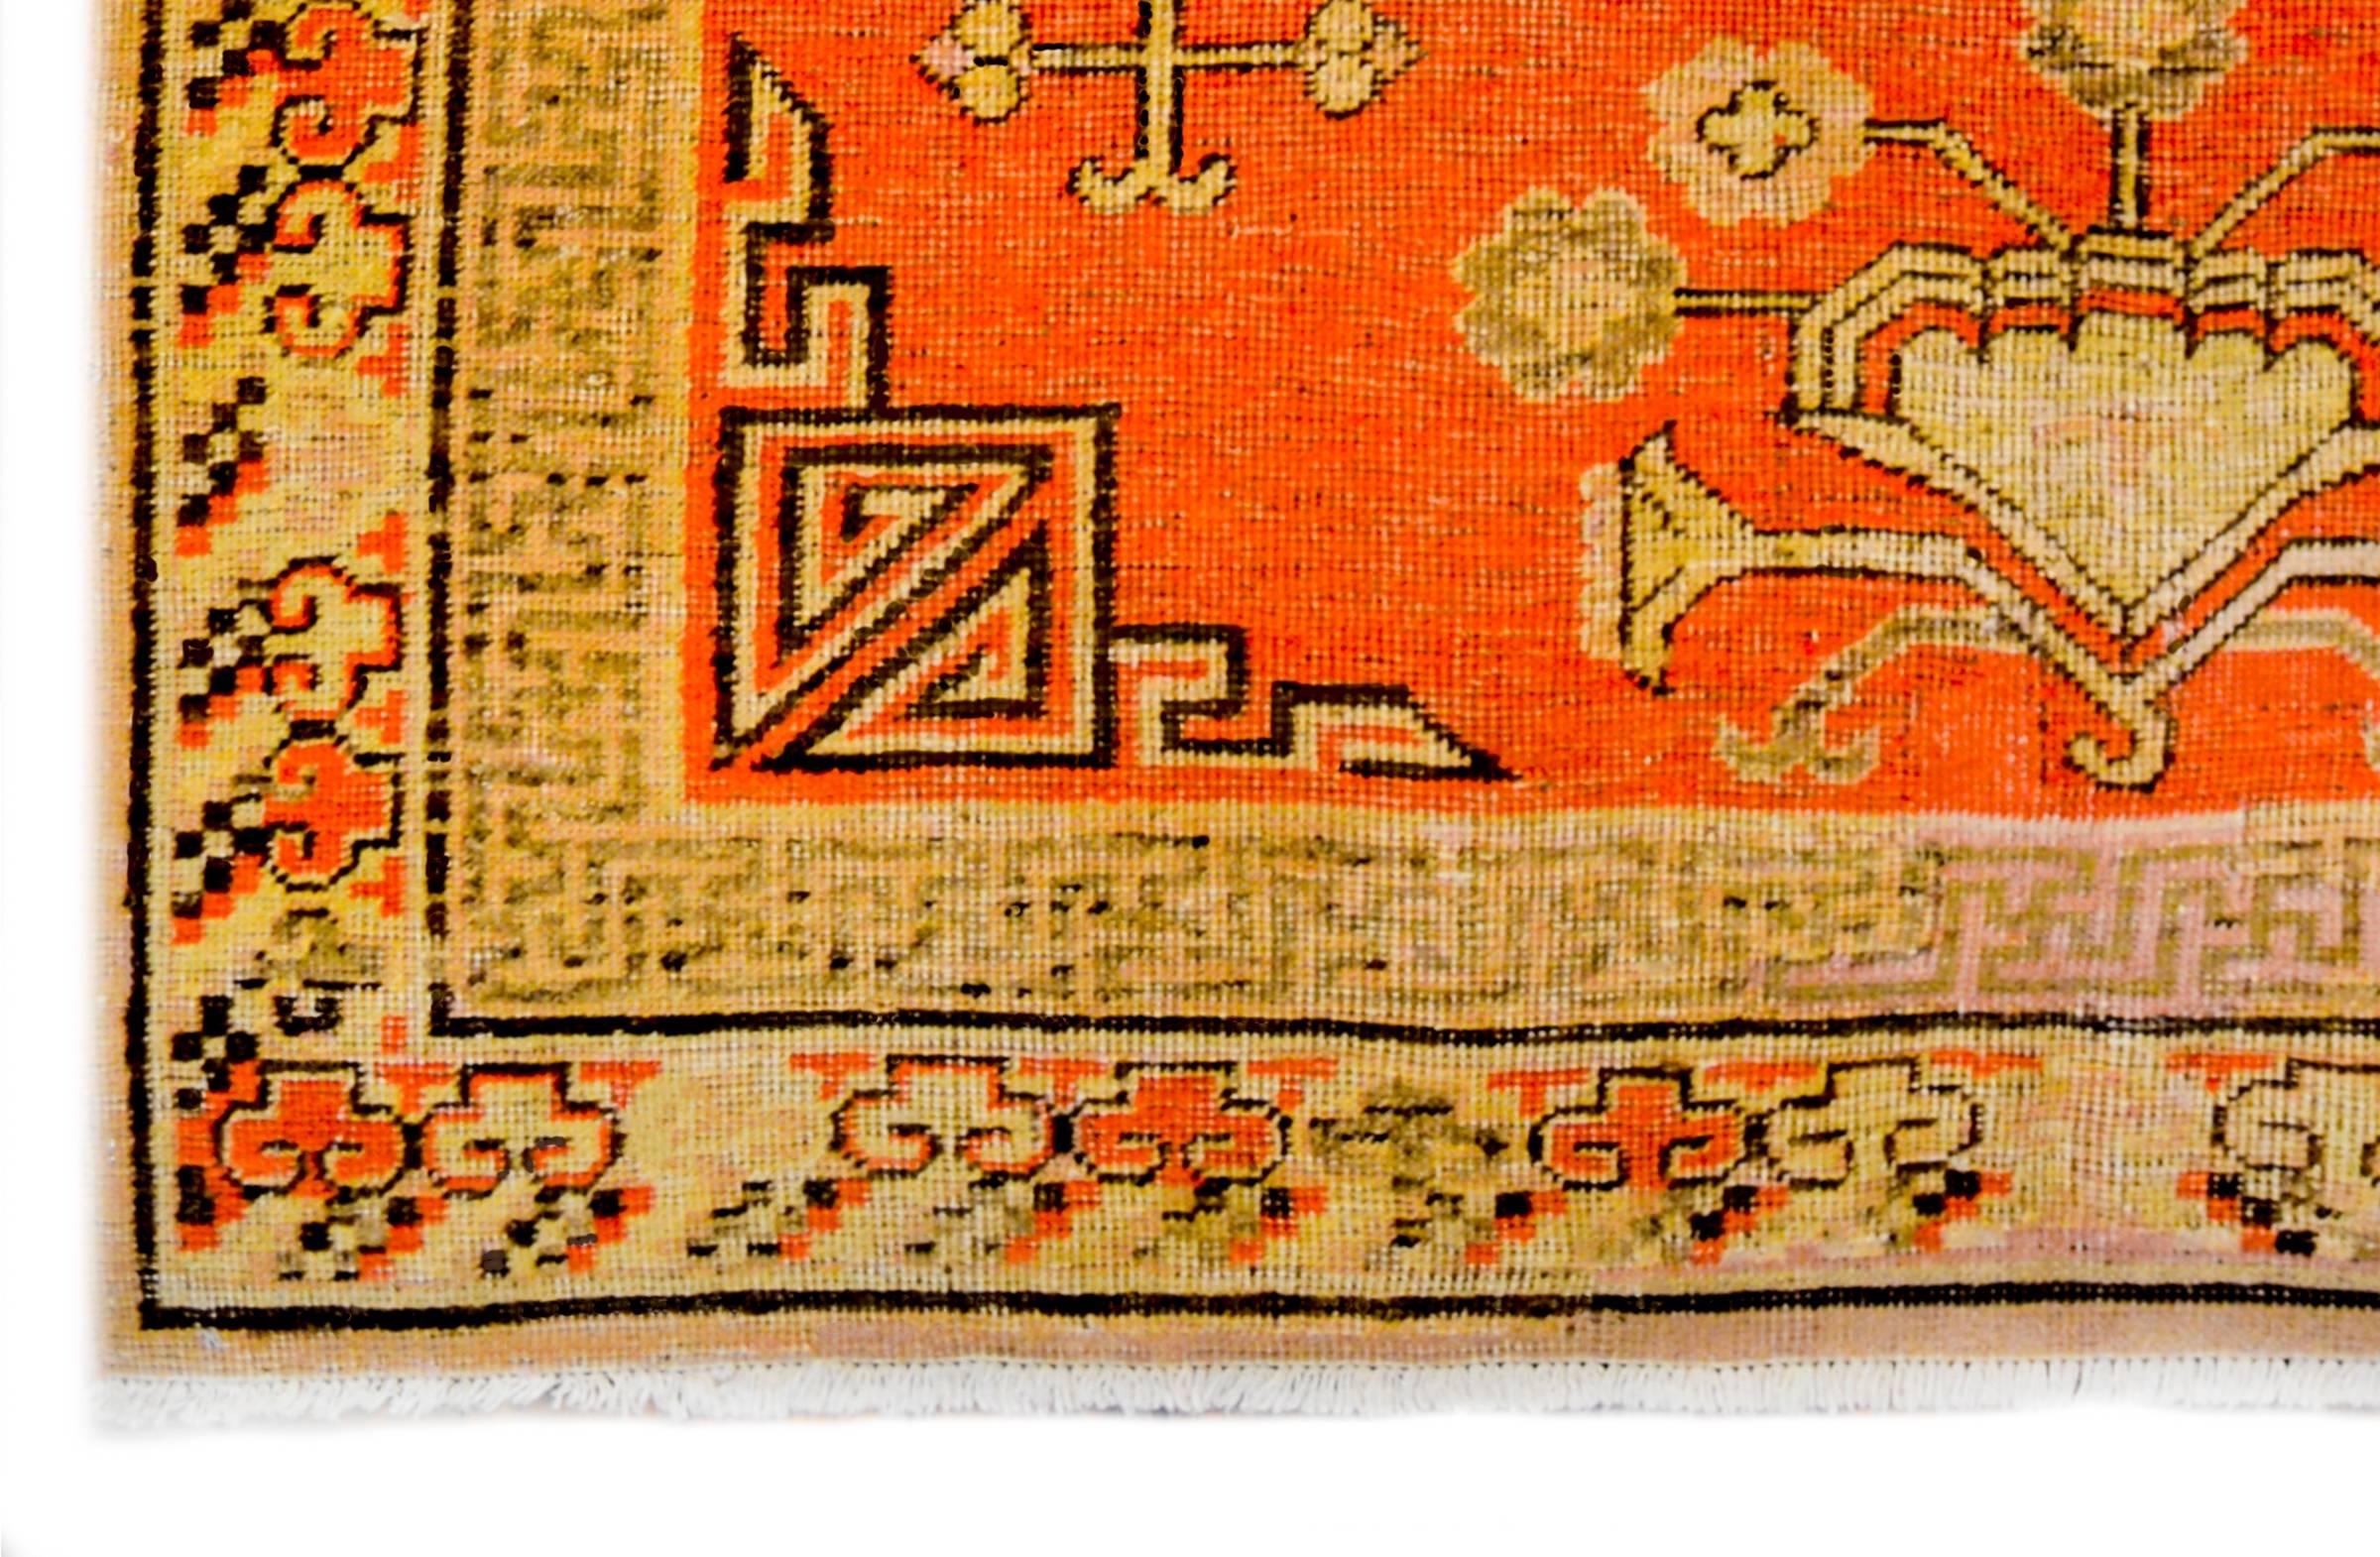 An incredible late 19th century Central Asian Samarghand rug with a wonderful stylized floral and pomegranate motif surround two large-scale medallions on a burnt orange field. The border is interesting with an abrash fade, and woven with a Chinese